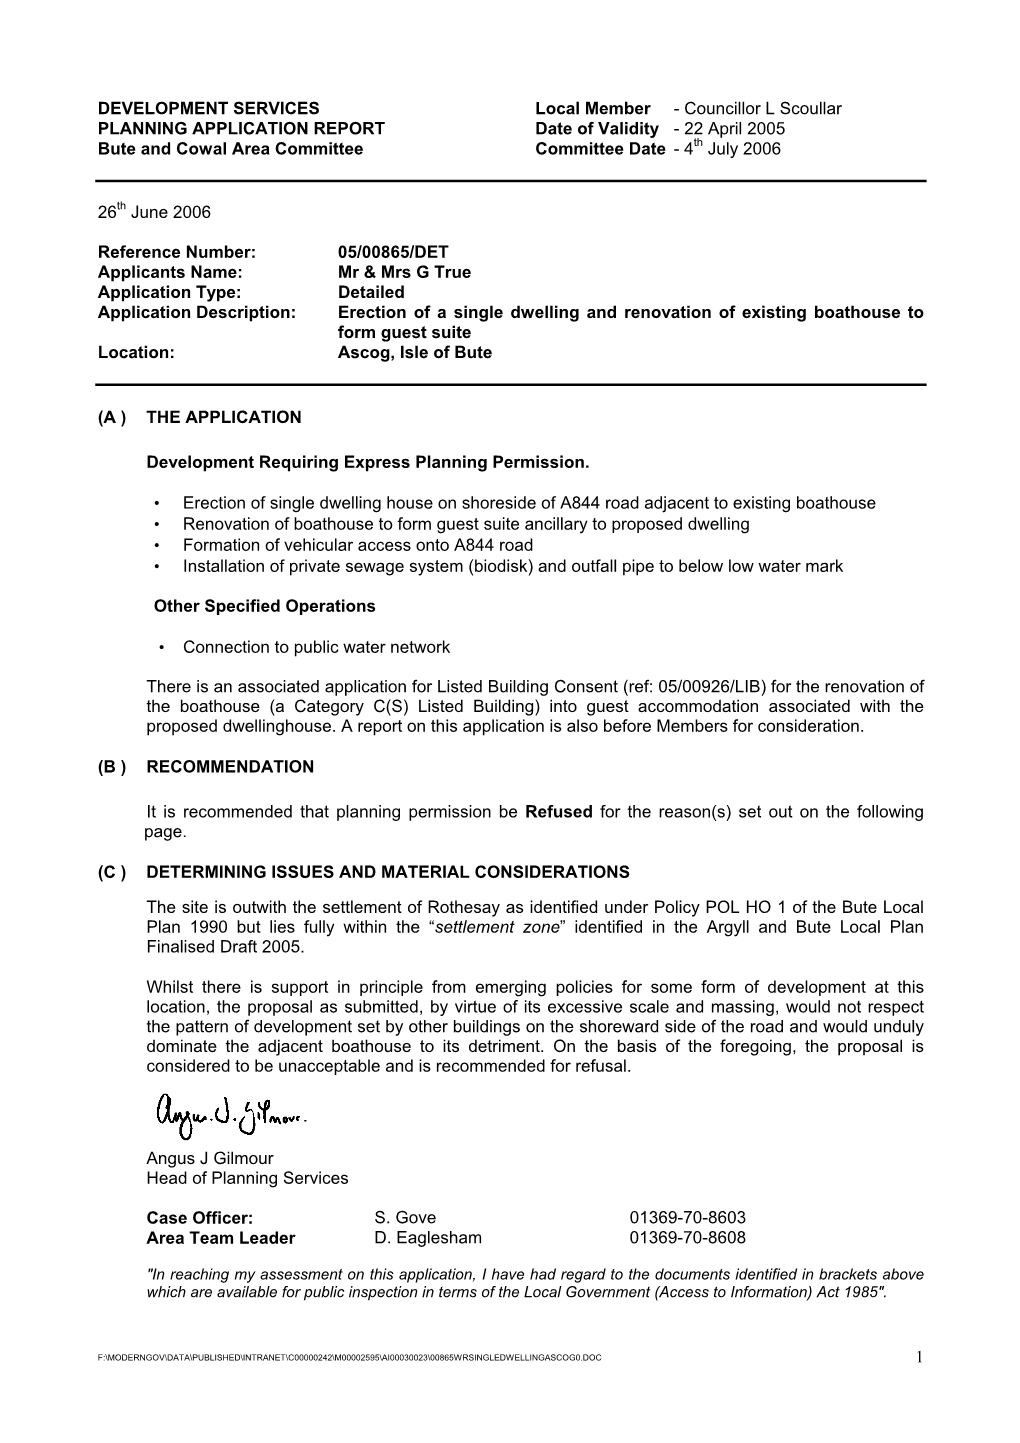 Councillor L Scoullar PLANNING APPLICATION REPORT Date of Validity - 22 April 2005 Bute and Cowal Area Committee Committee Date - 4Th July 2006